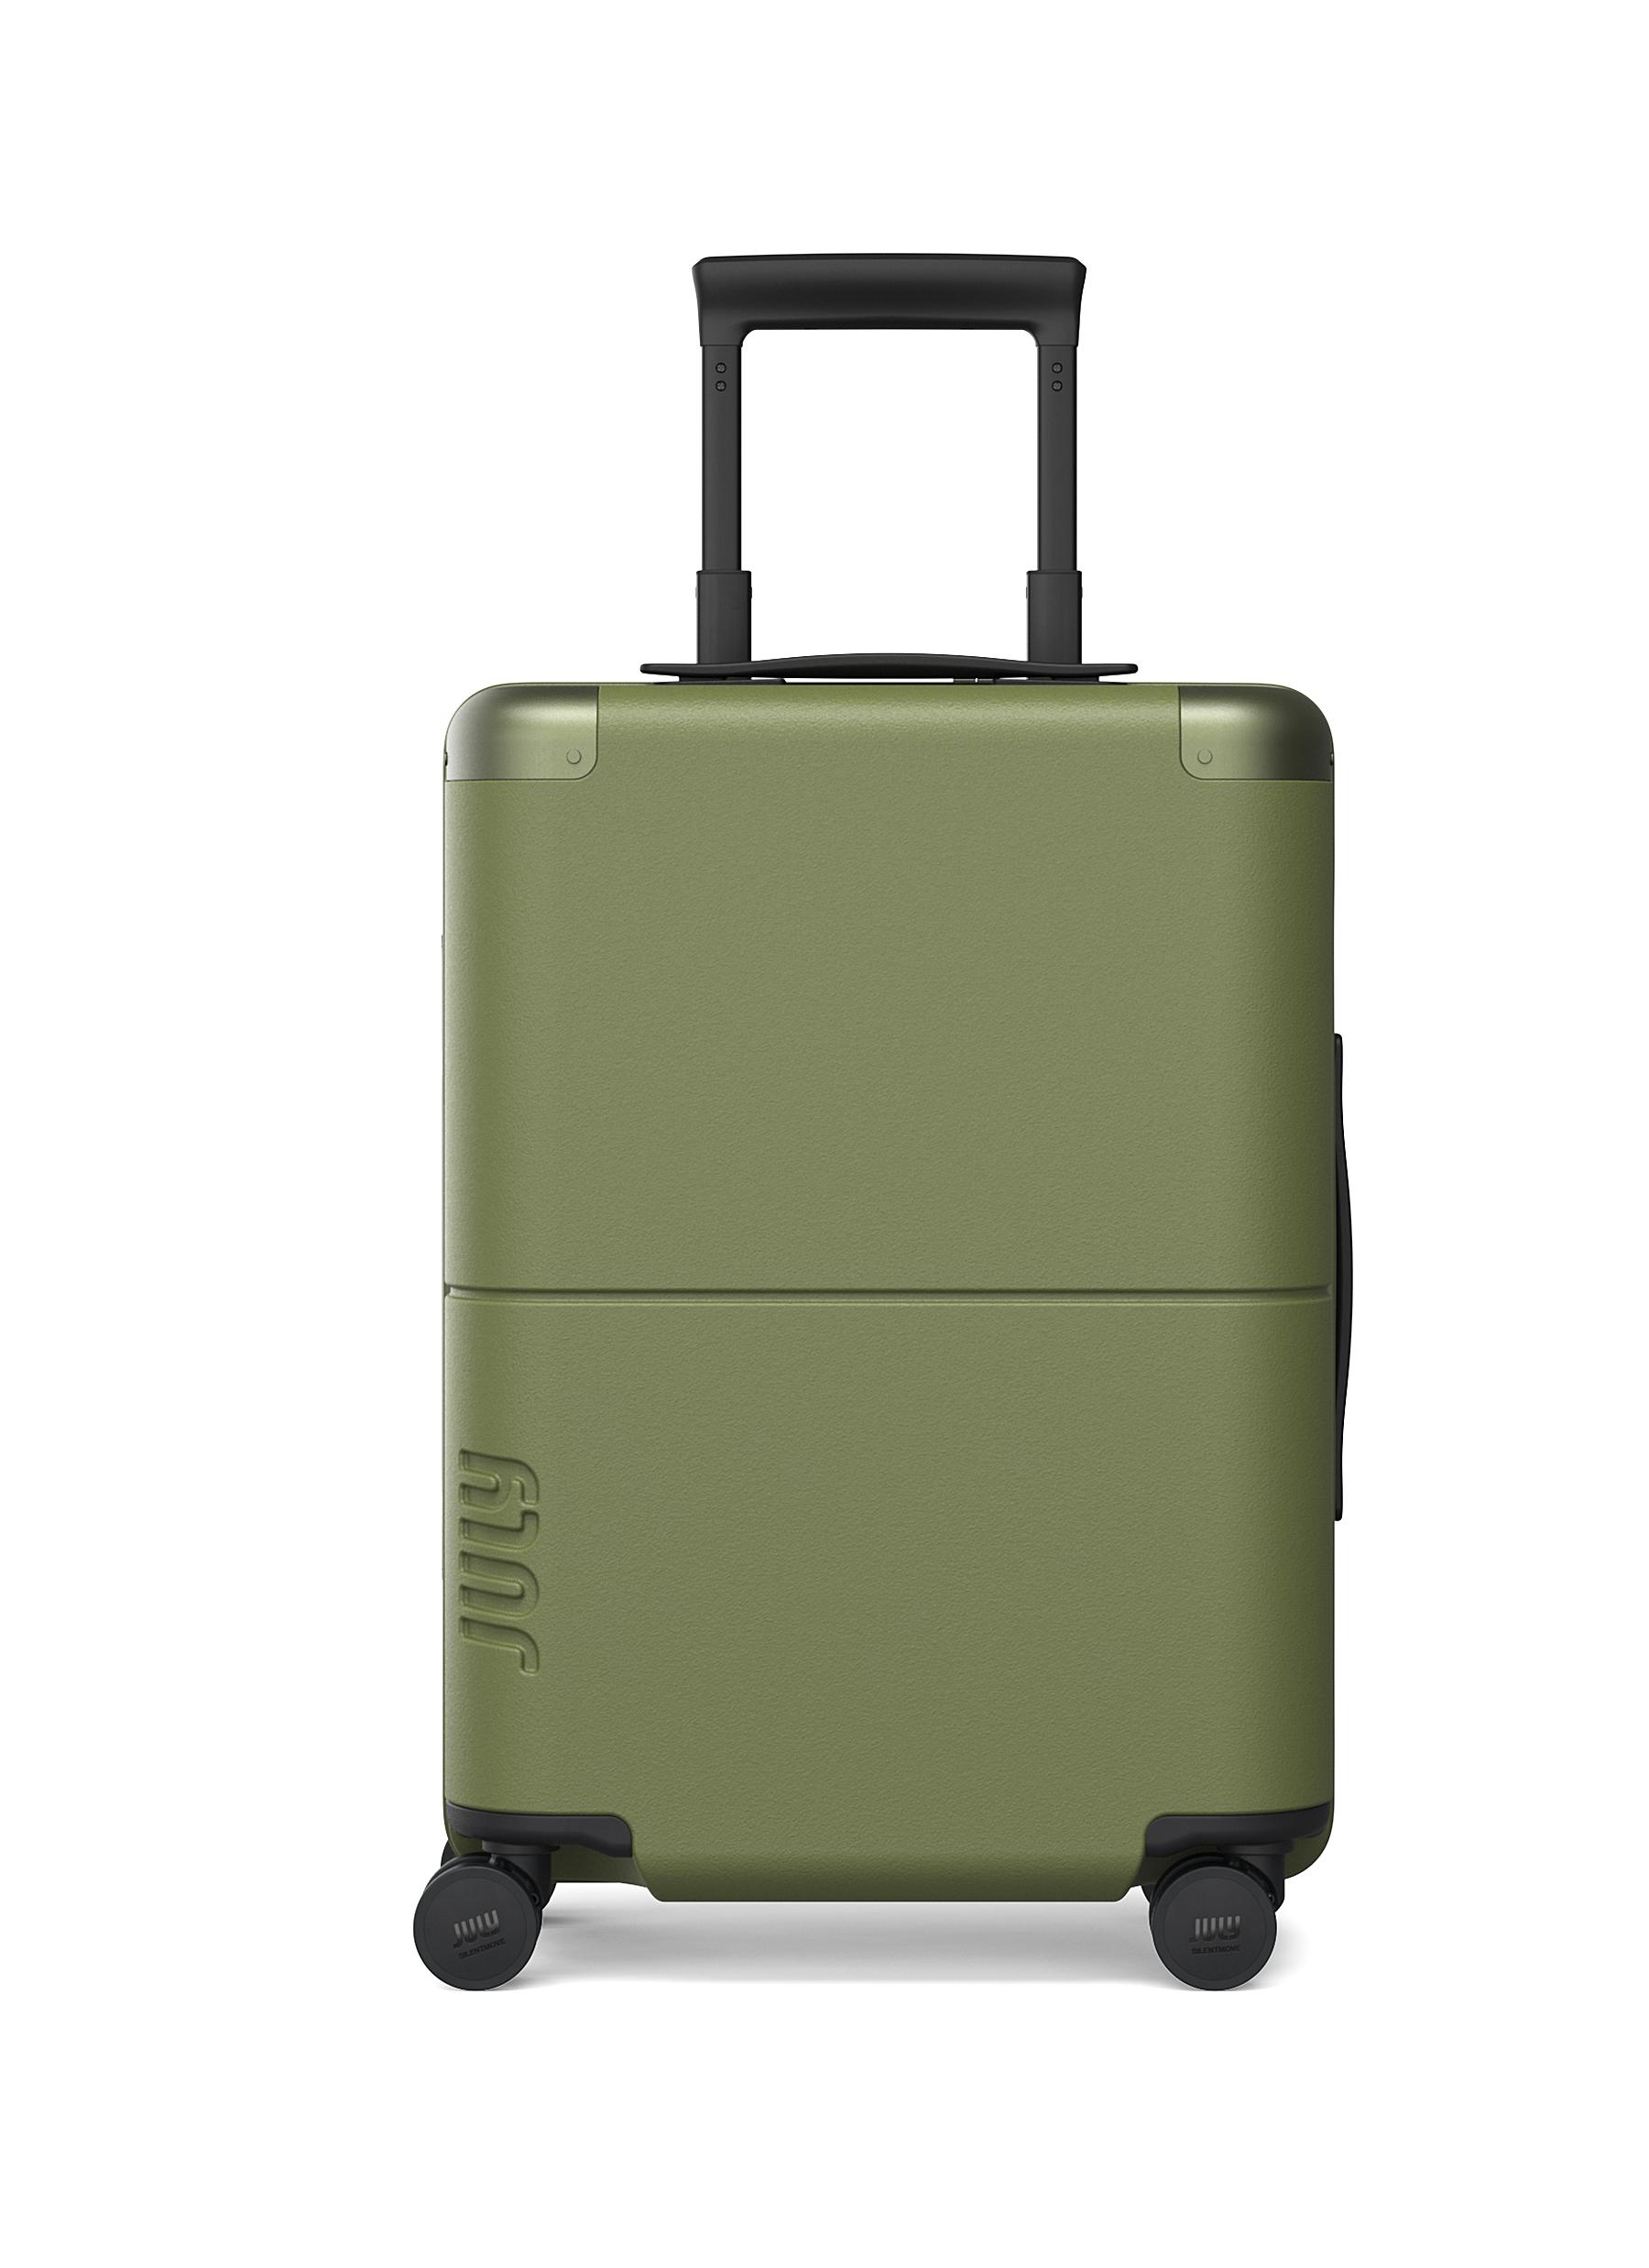 Carry On Suitcase - Moss Green